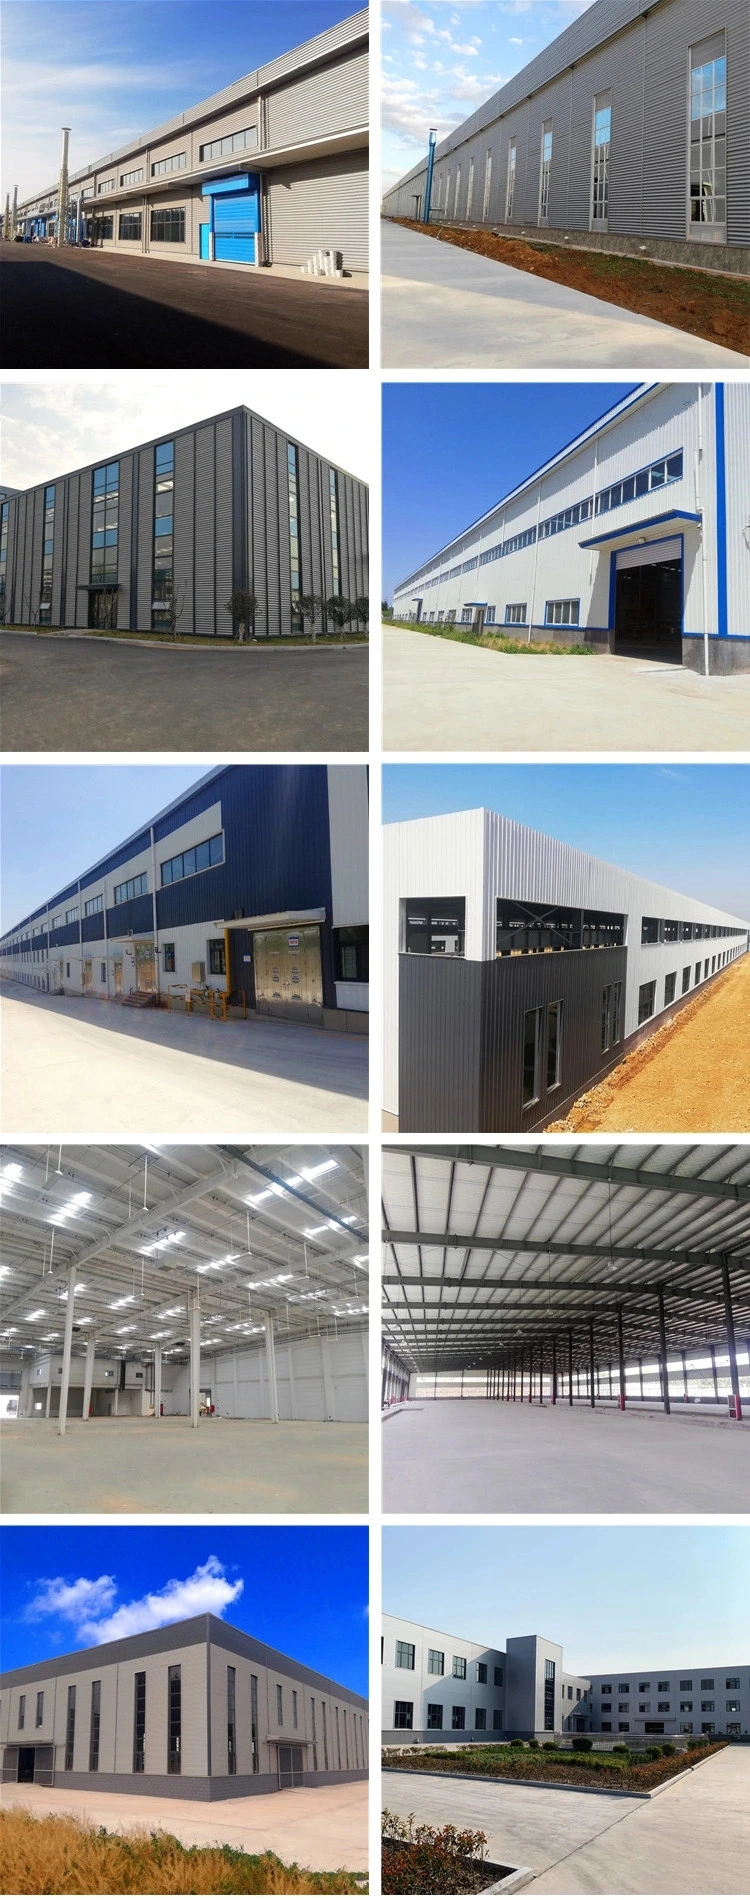 Low Budget Industrial Steel Structure Building Metal Construction Warehouse Building